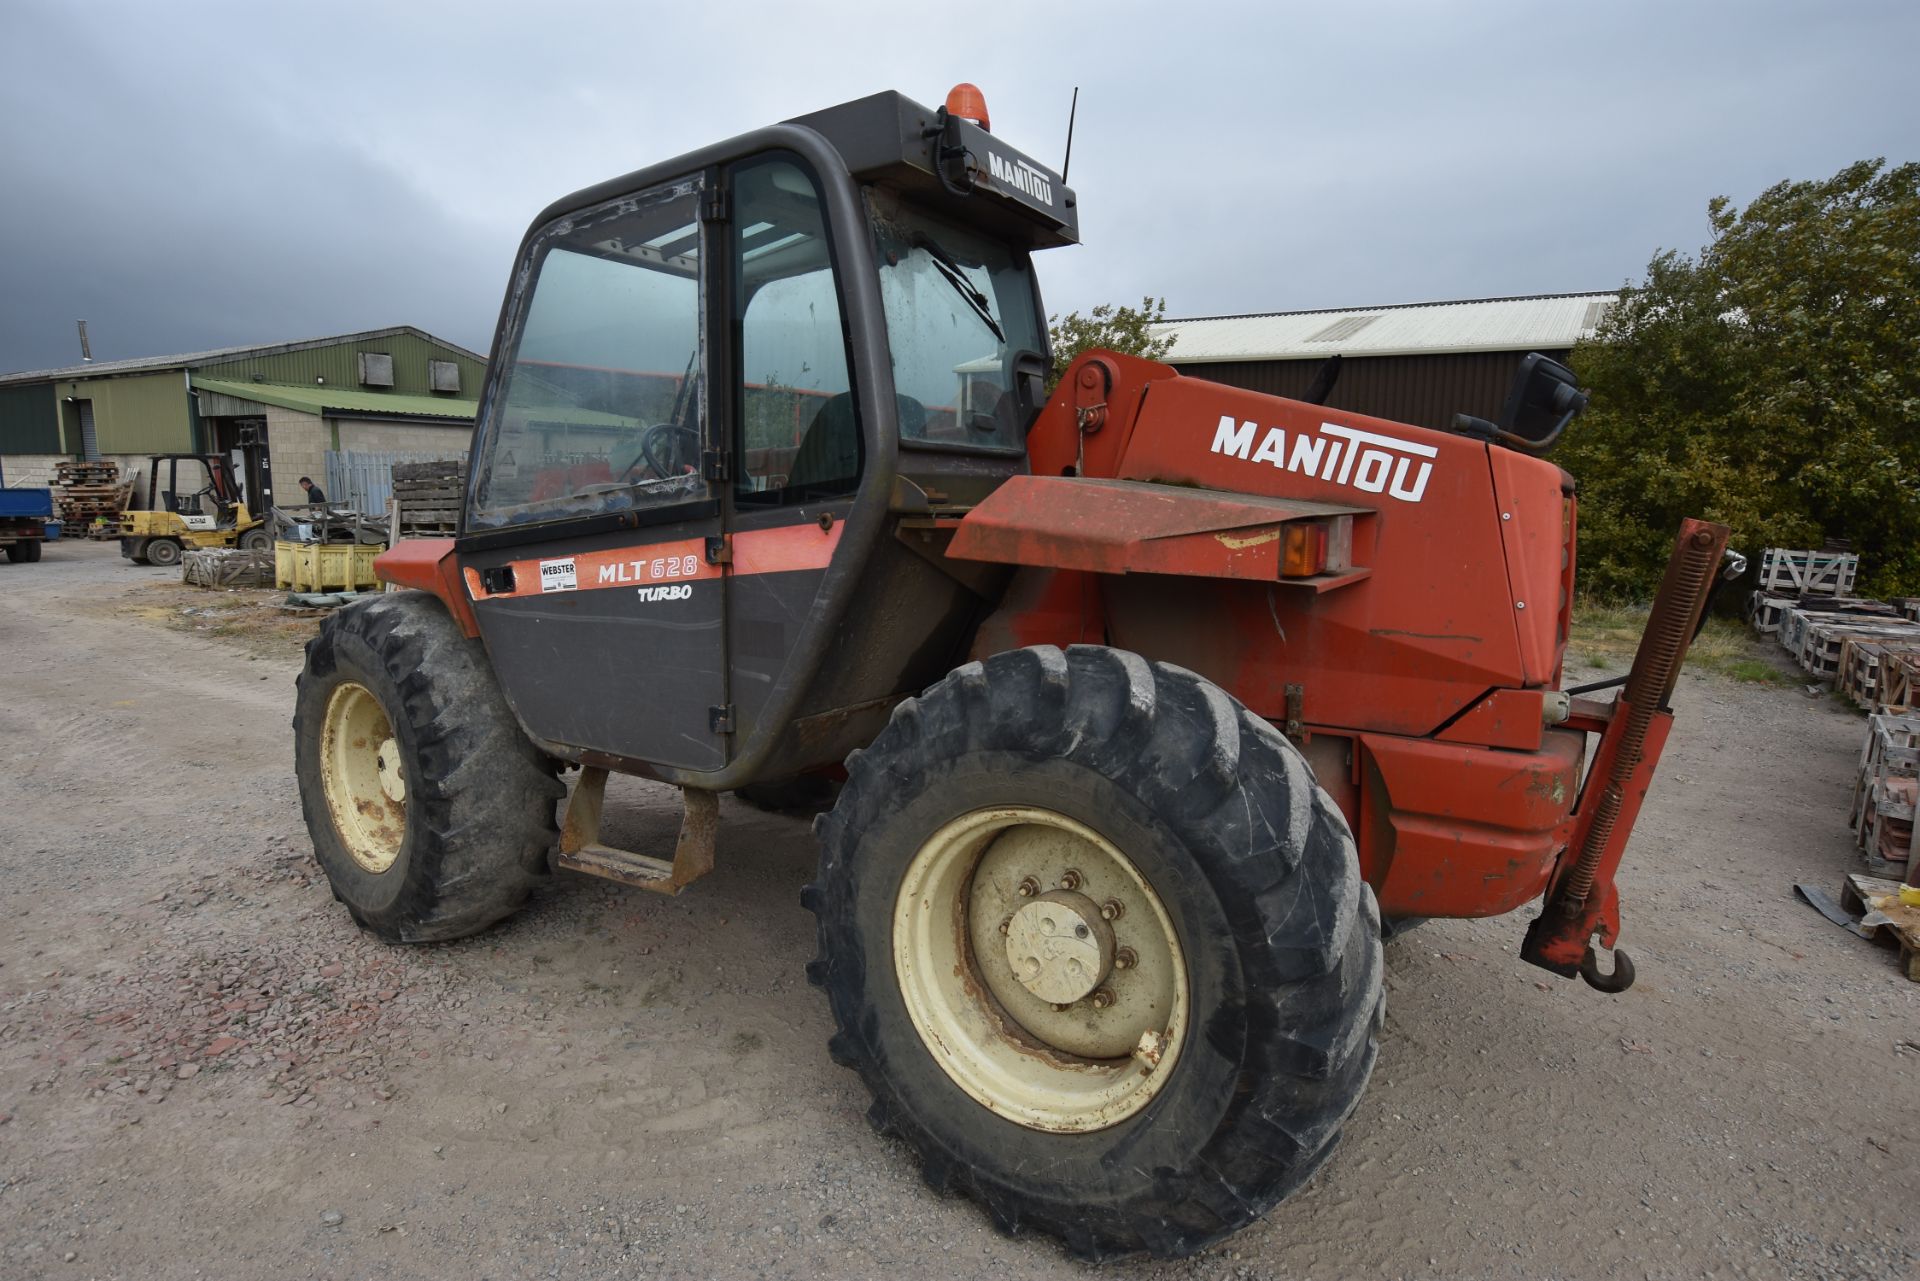 Minitou MLT628 Turbo Tele Handler, Model: MLT628T, Serial Number: 133788, Chassis Number: 1133788, - Image 4 of 5